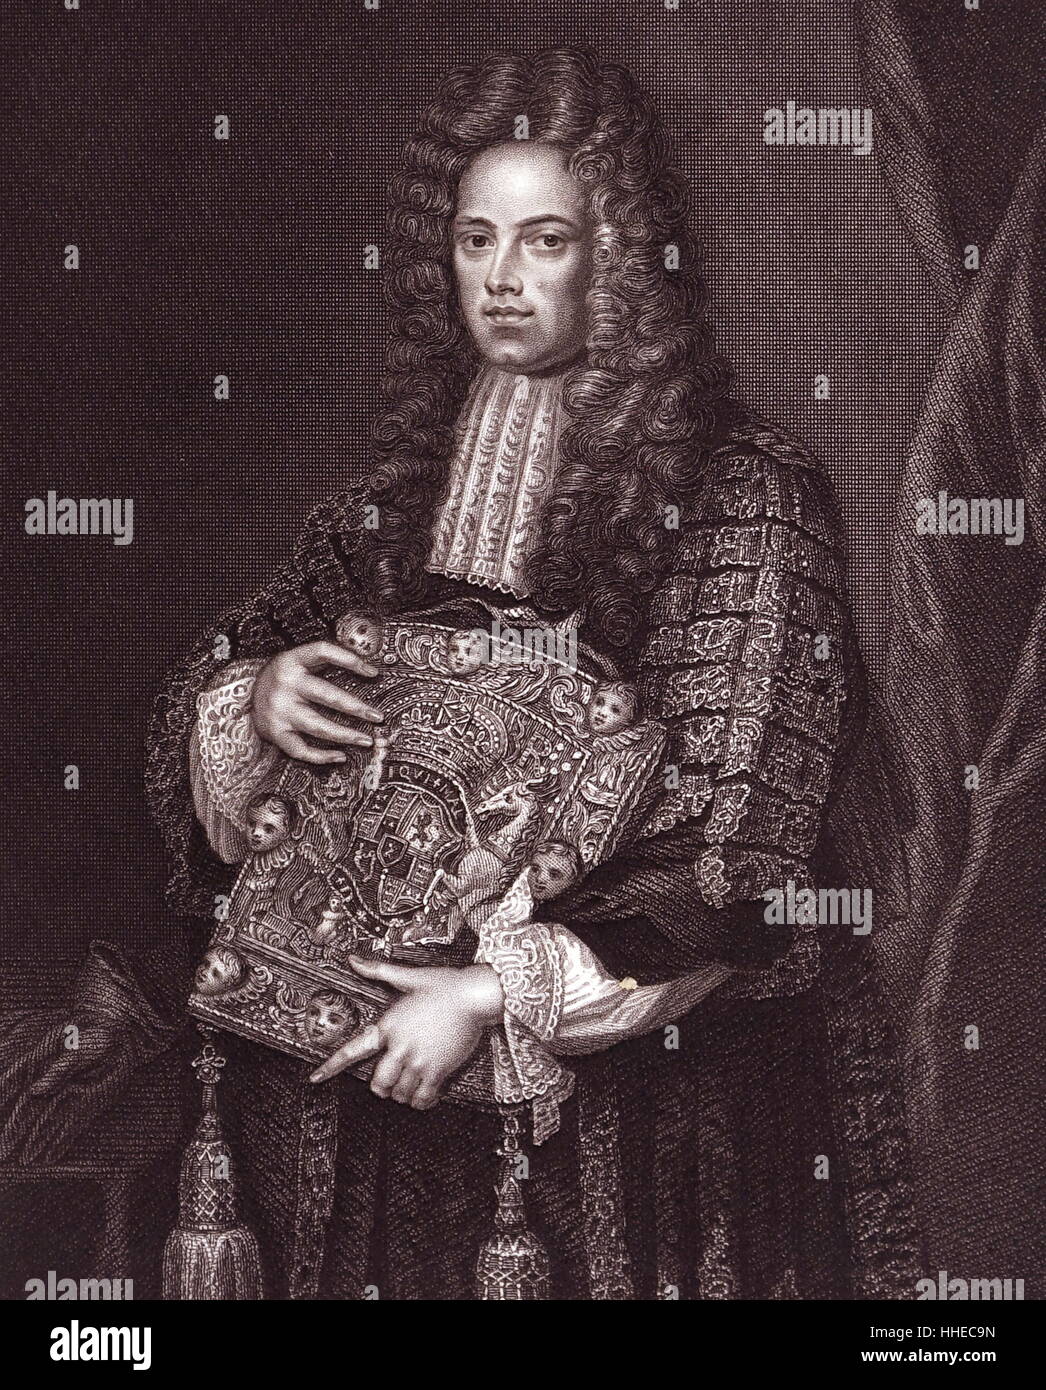 John Somers or Sommers (1651-1716) English lawyer and politician: Counsel for the seven bishops 1688. Lord Chancellor 1697. Friend and patron of poets and writers. Jonathan Swift dedicated 'Tale of a Tub 1704 to him. 1840 engraving after a portrait by Godfrey Kneller showing Somers holding the Lord Chancellor’s purse. Stock Photo